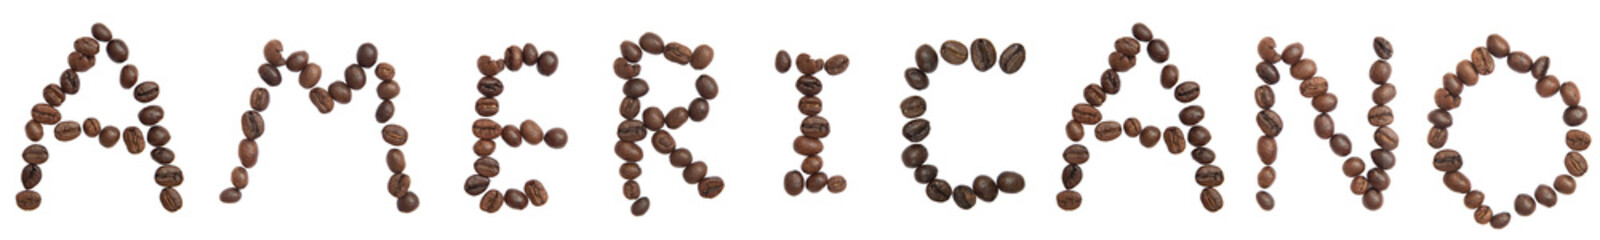 Isolated Word 'AMERICANO' make from coffee bean on white backgro